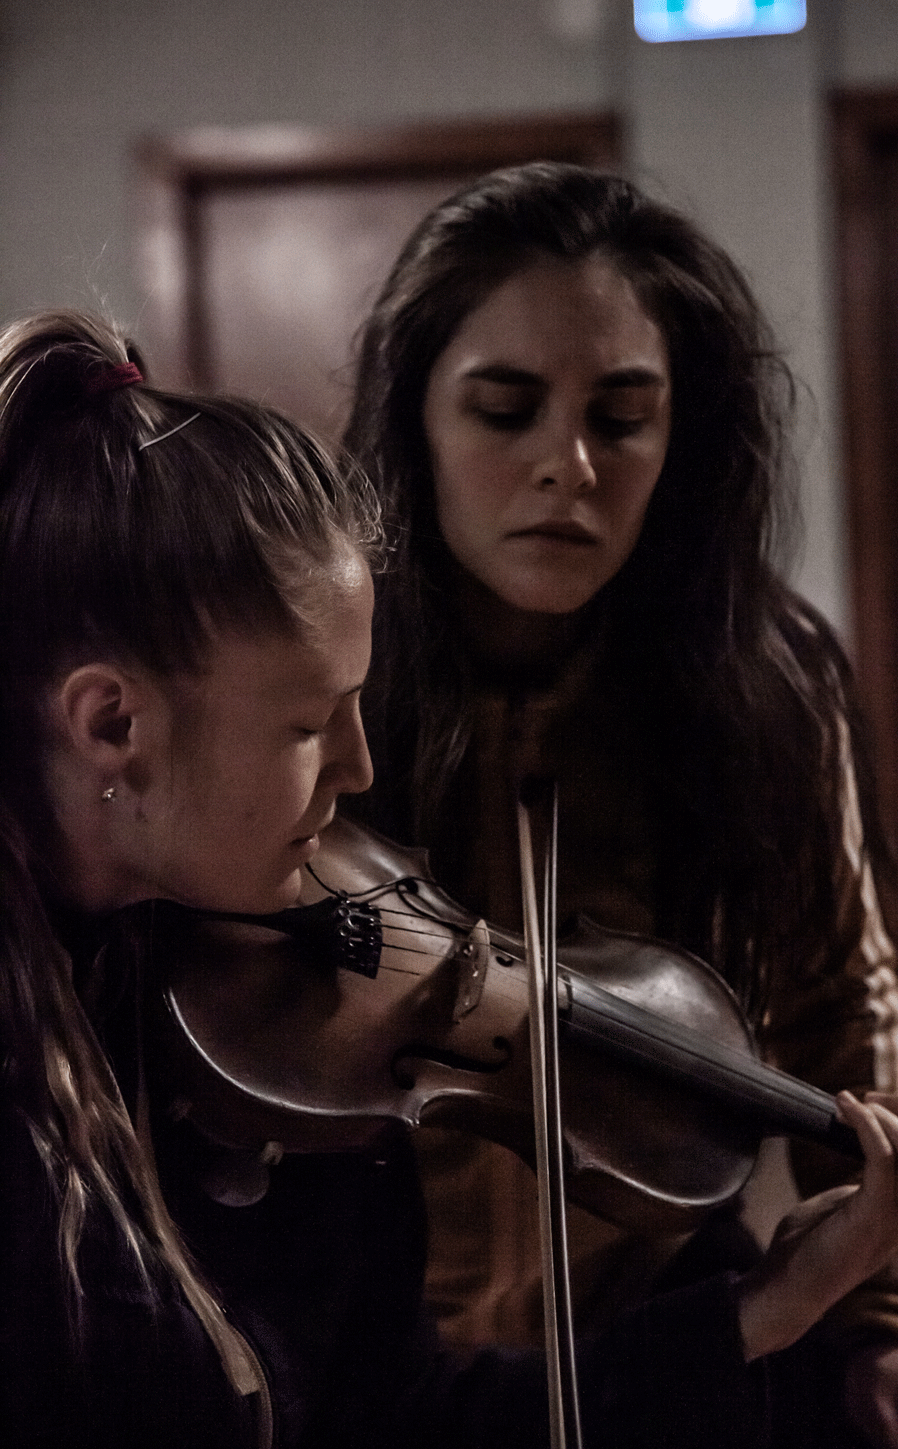 Dance artist Rebecca Margolick watches musician Hannah Epperson while she plays she plays the violin. Both have their eyes closed.